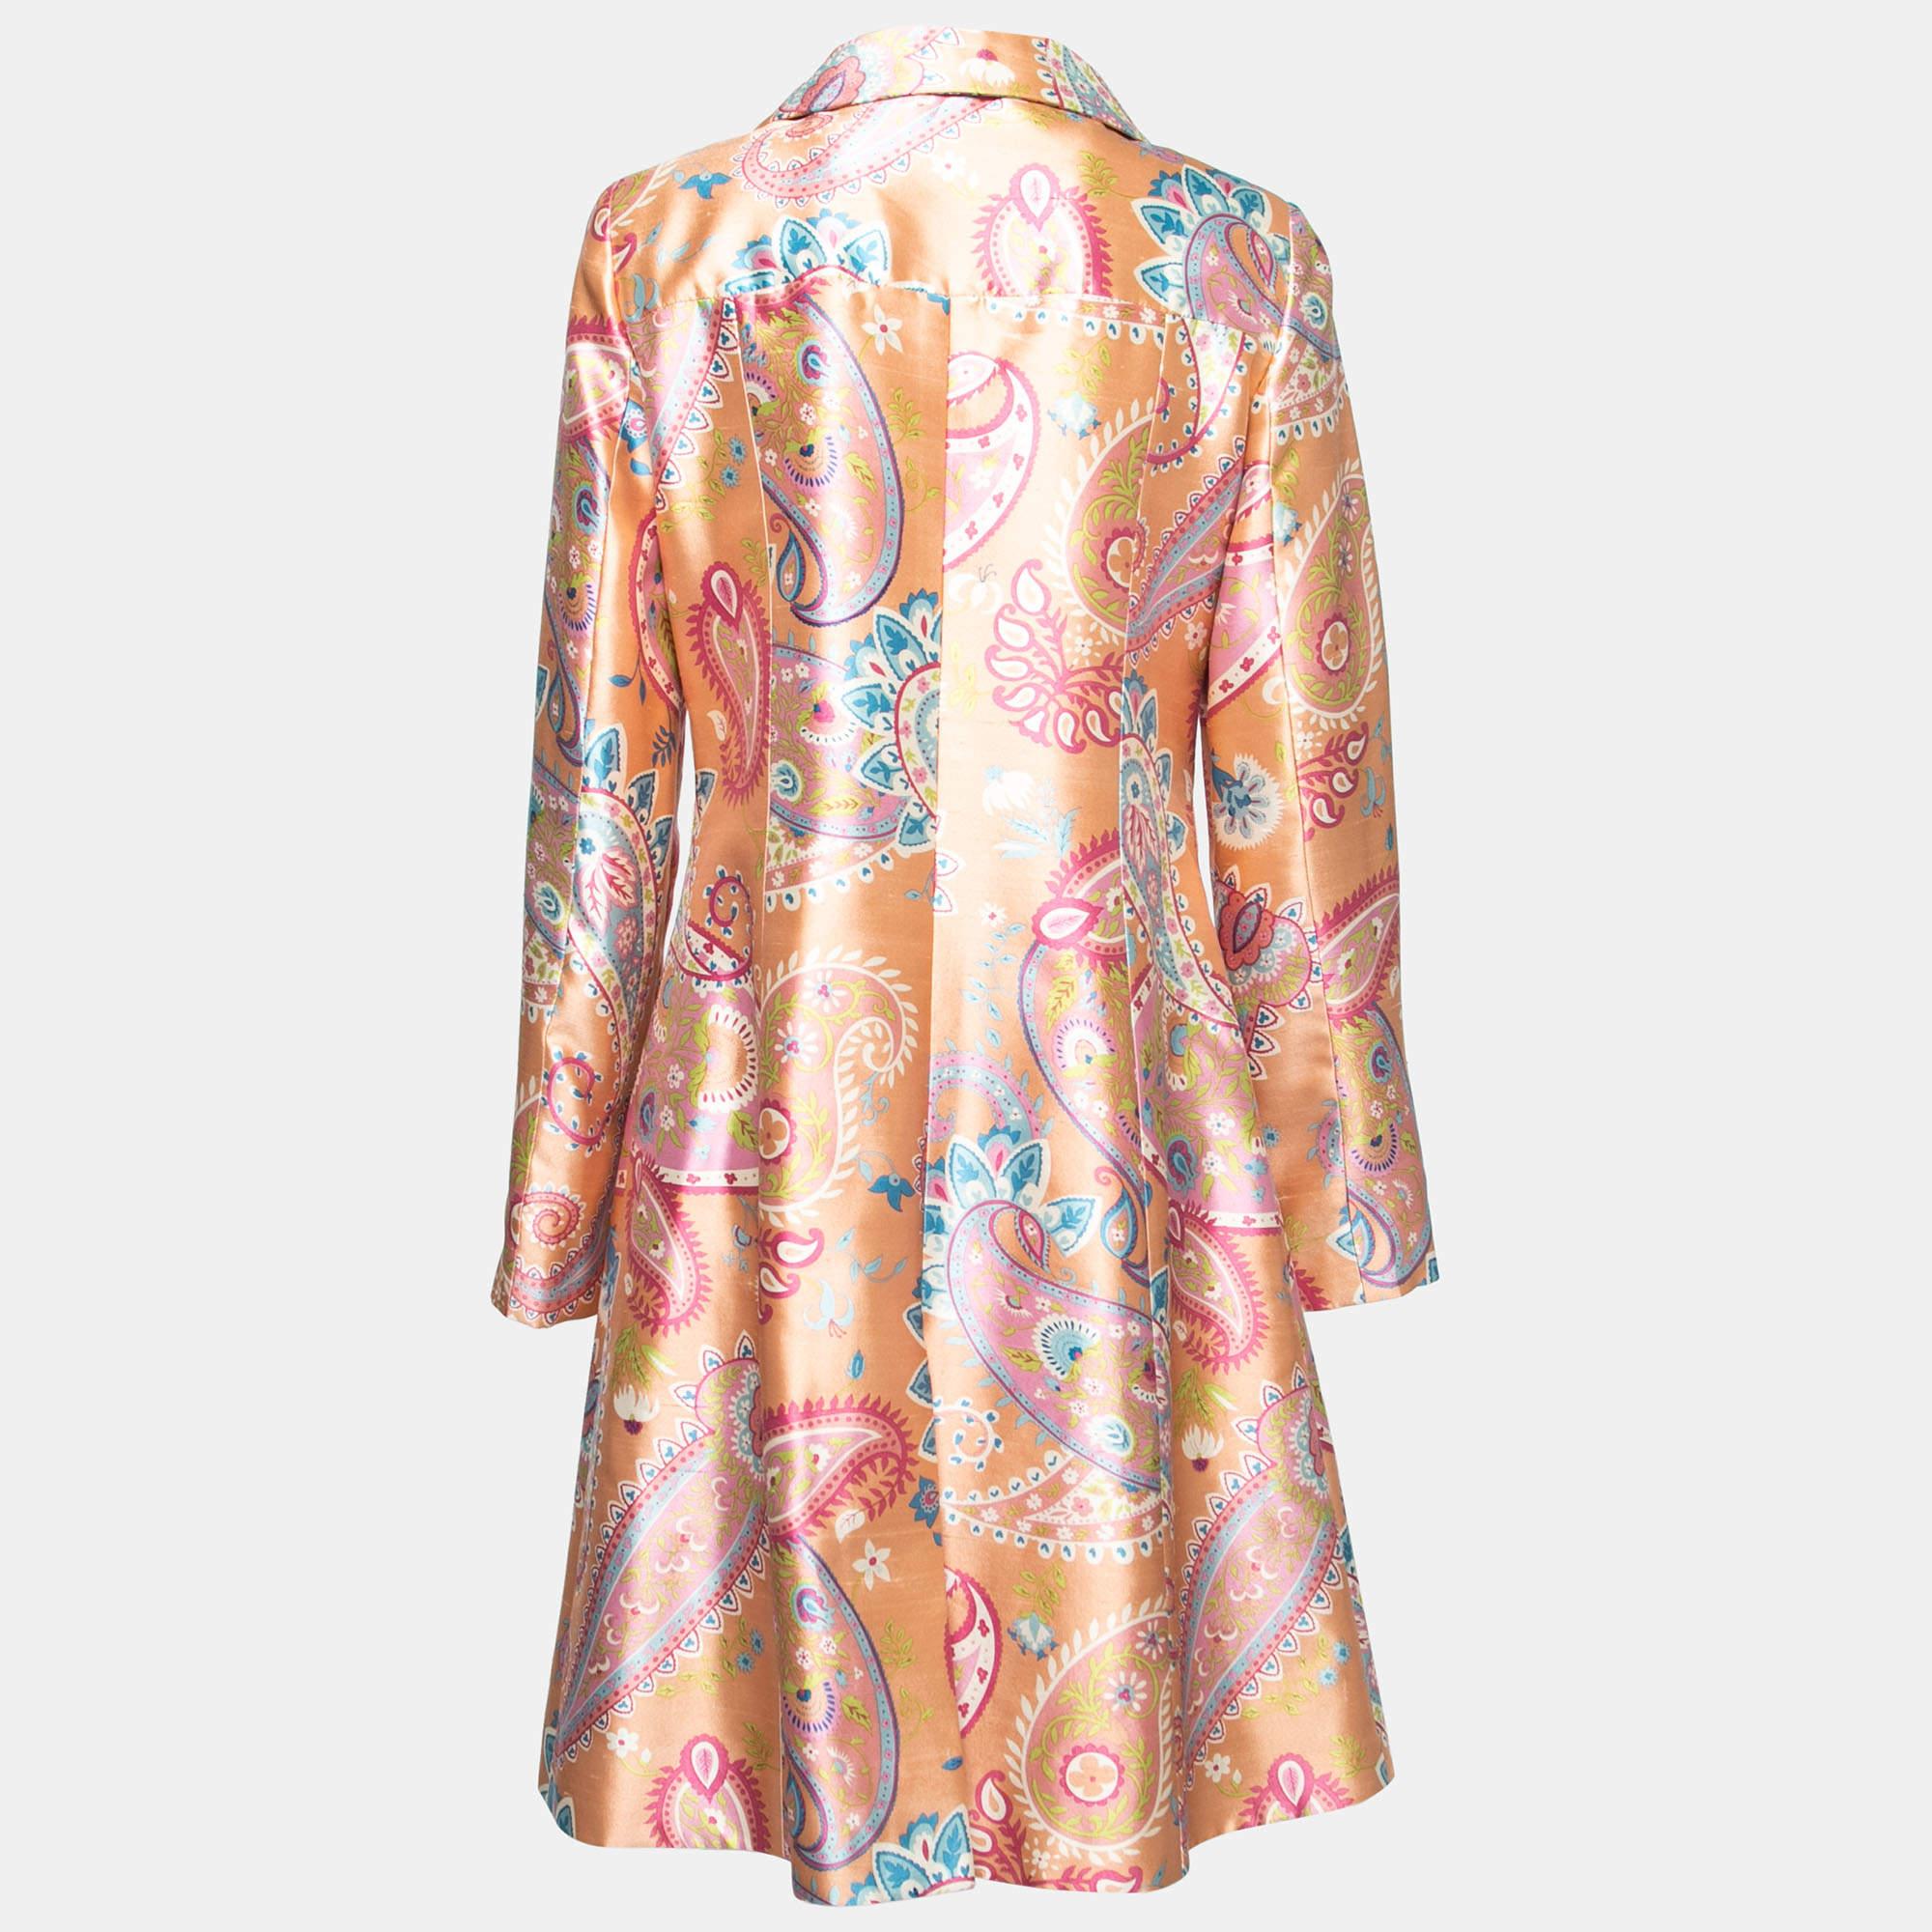 Bring springtime refreshment and Christian Dior's freshly-chic aesthetic to your closet with this beautifully-tailored coat. It has been designed using silk with paisley print throughout. It is equipped with a button-front feature, collars, and two